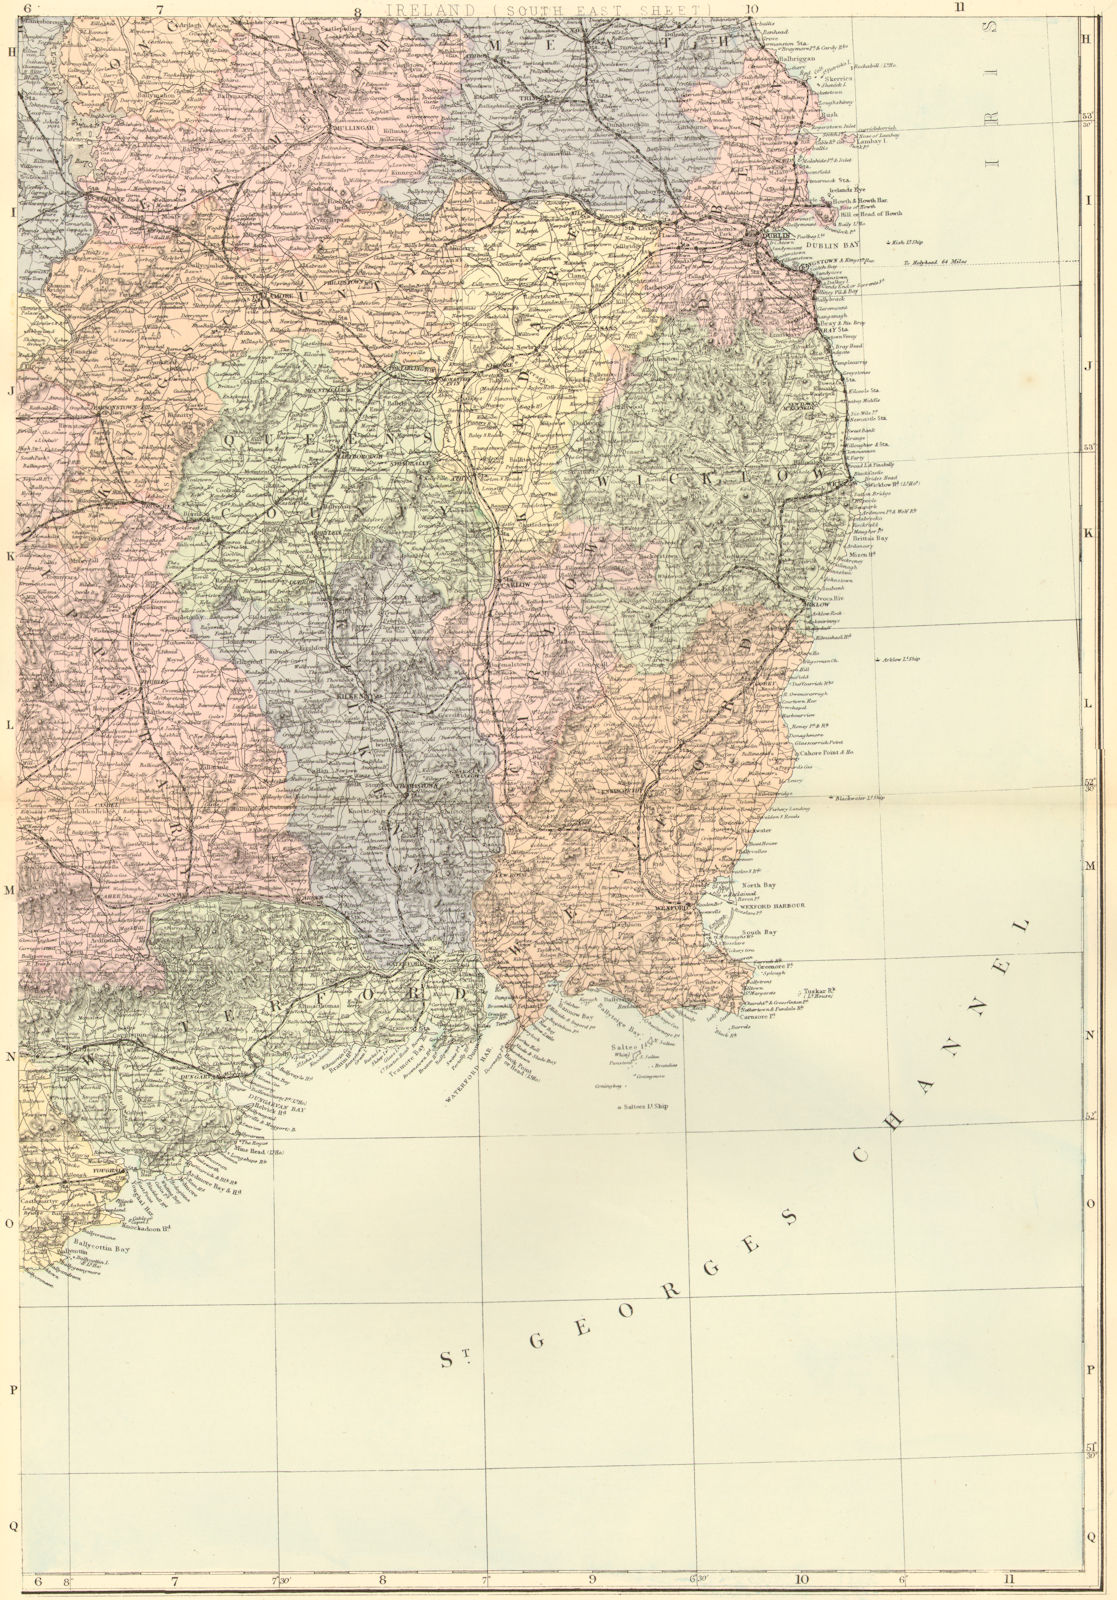 IRELAND (South East). Leinster. Dublin Wicklow Wexford. GW BACON 1884 old map